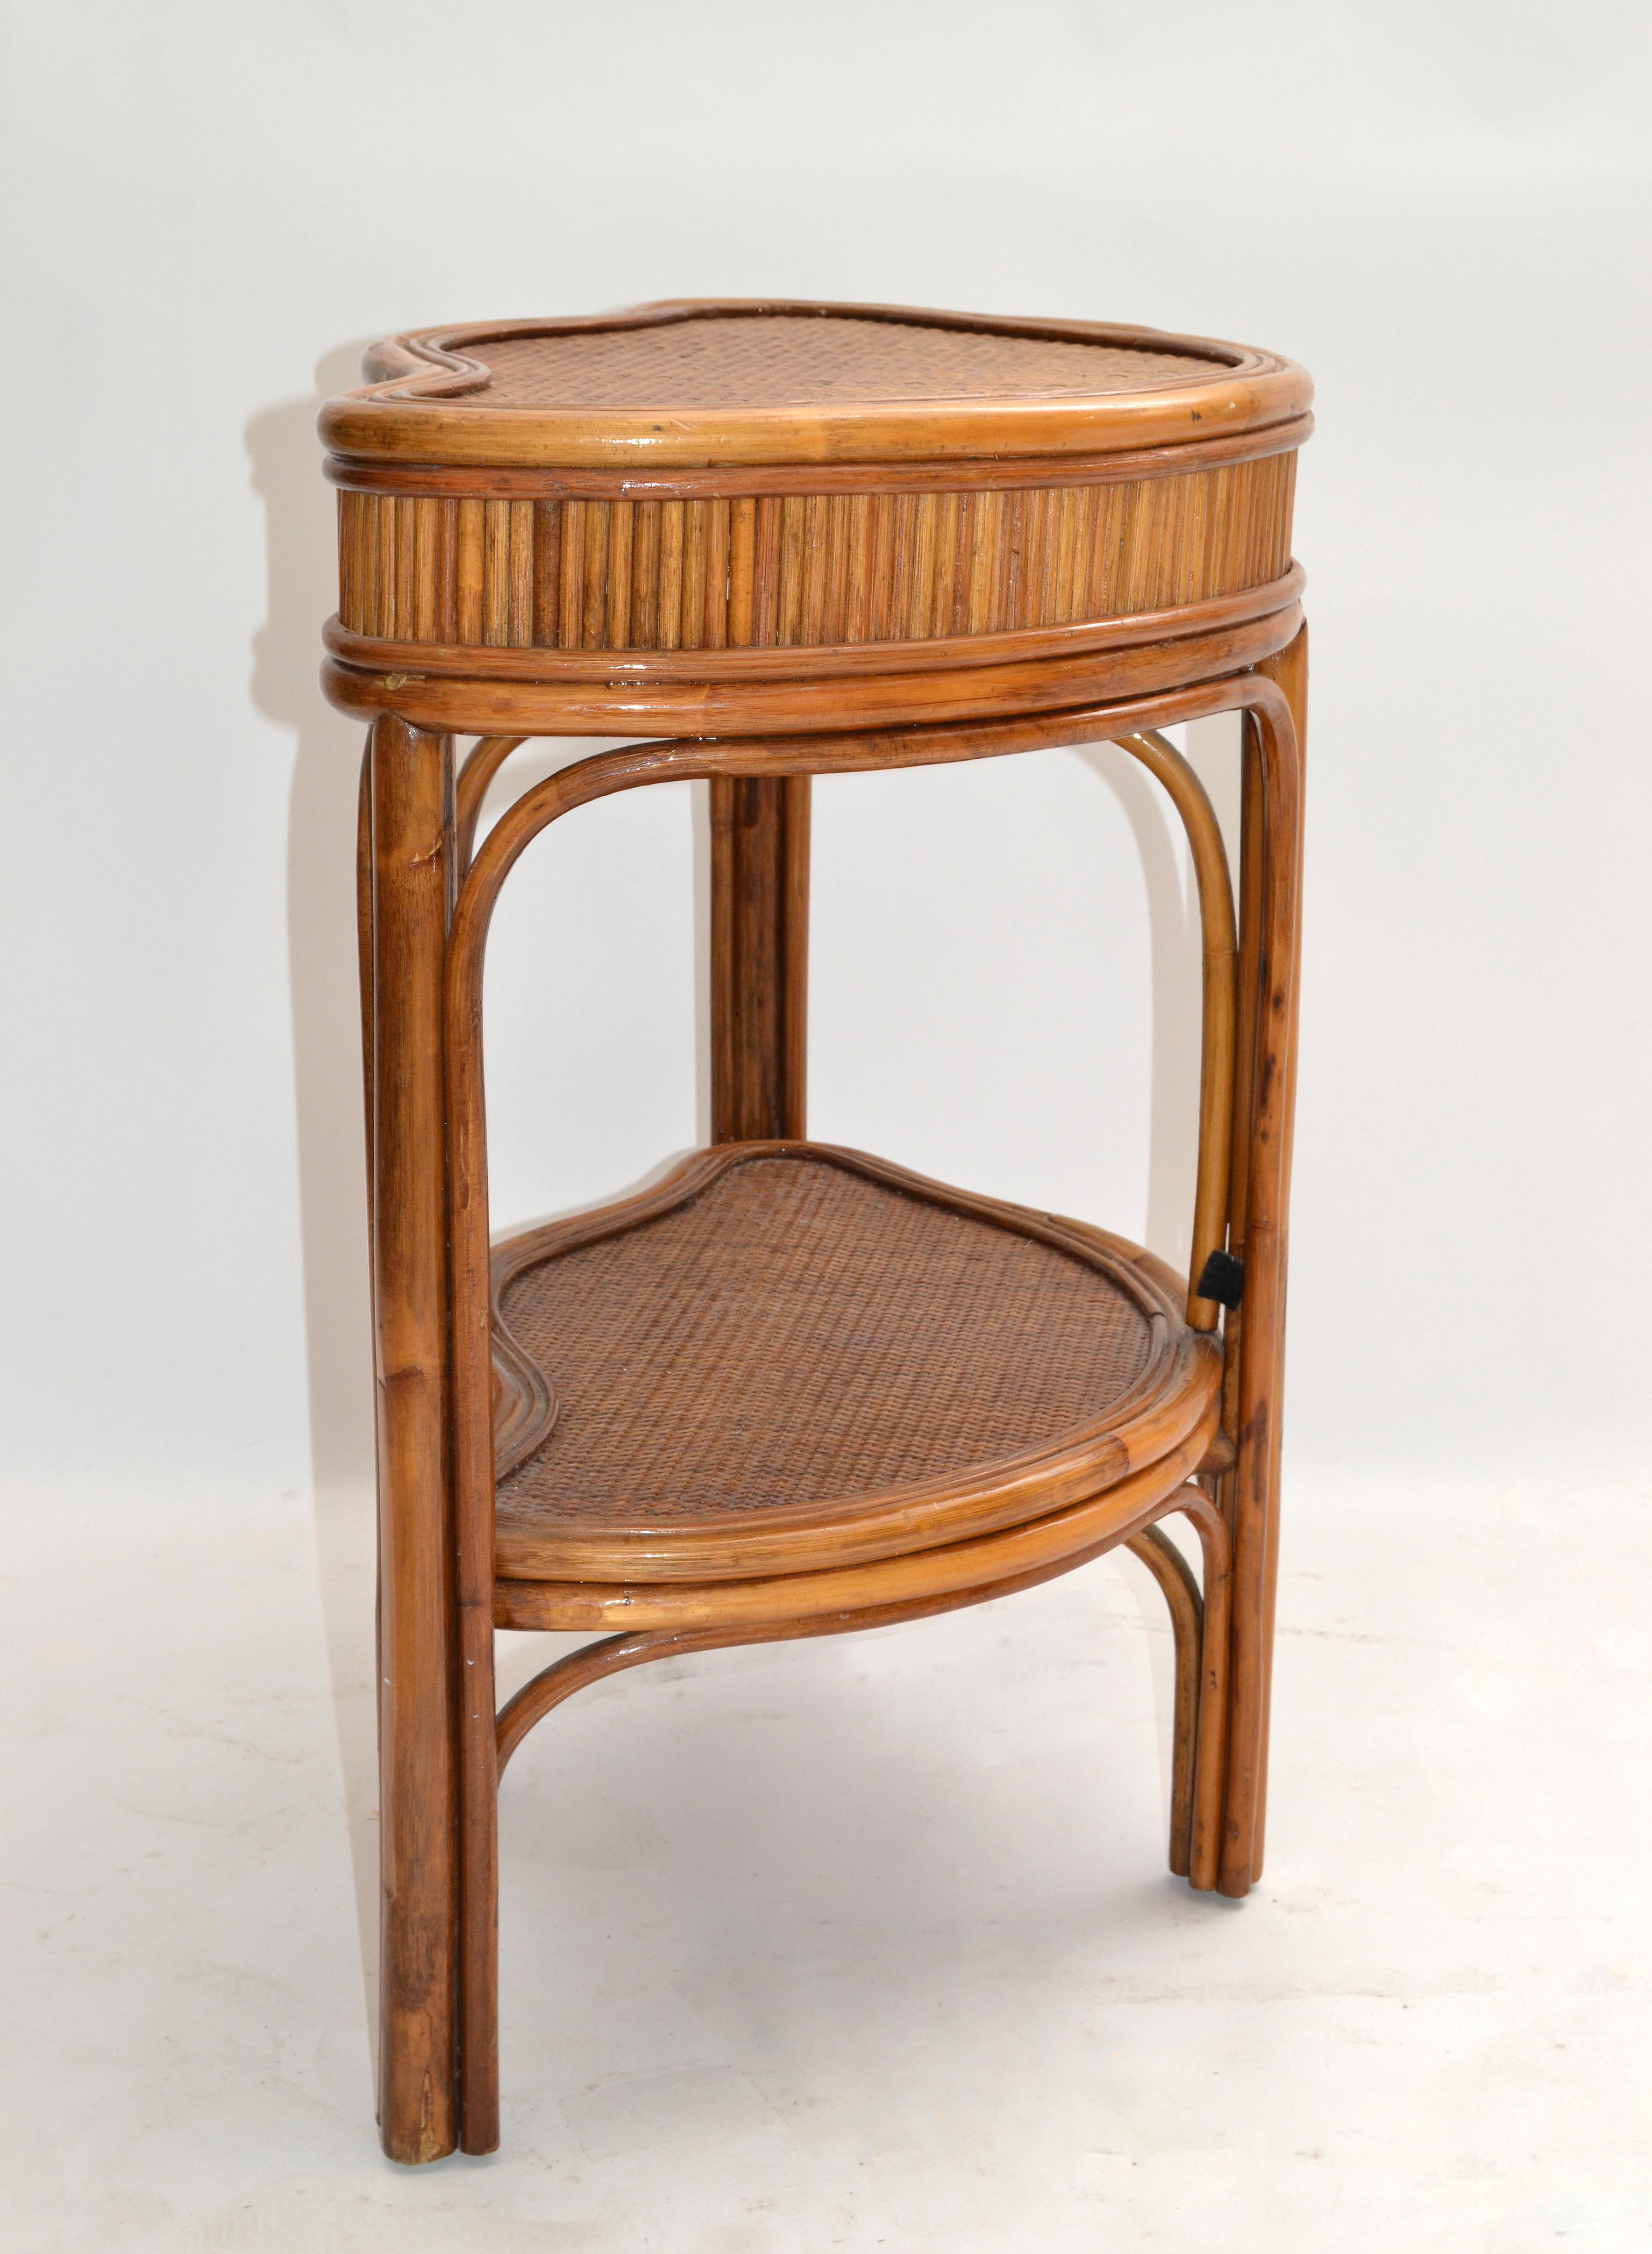 Late 20th Century Chinoiserie Bamboo & Rattan Handmade Two-Tier Side, End Table Asian Modern 70s For Sale